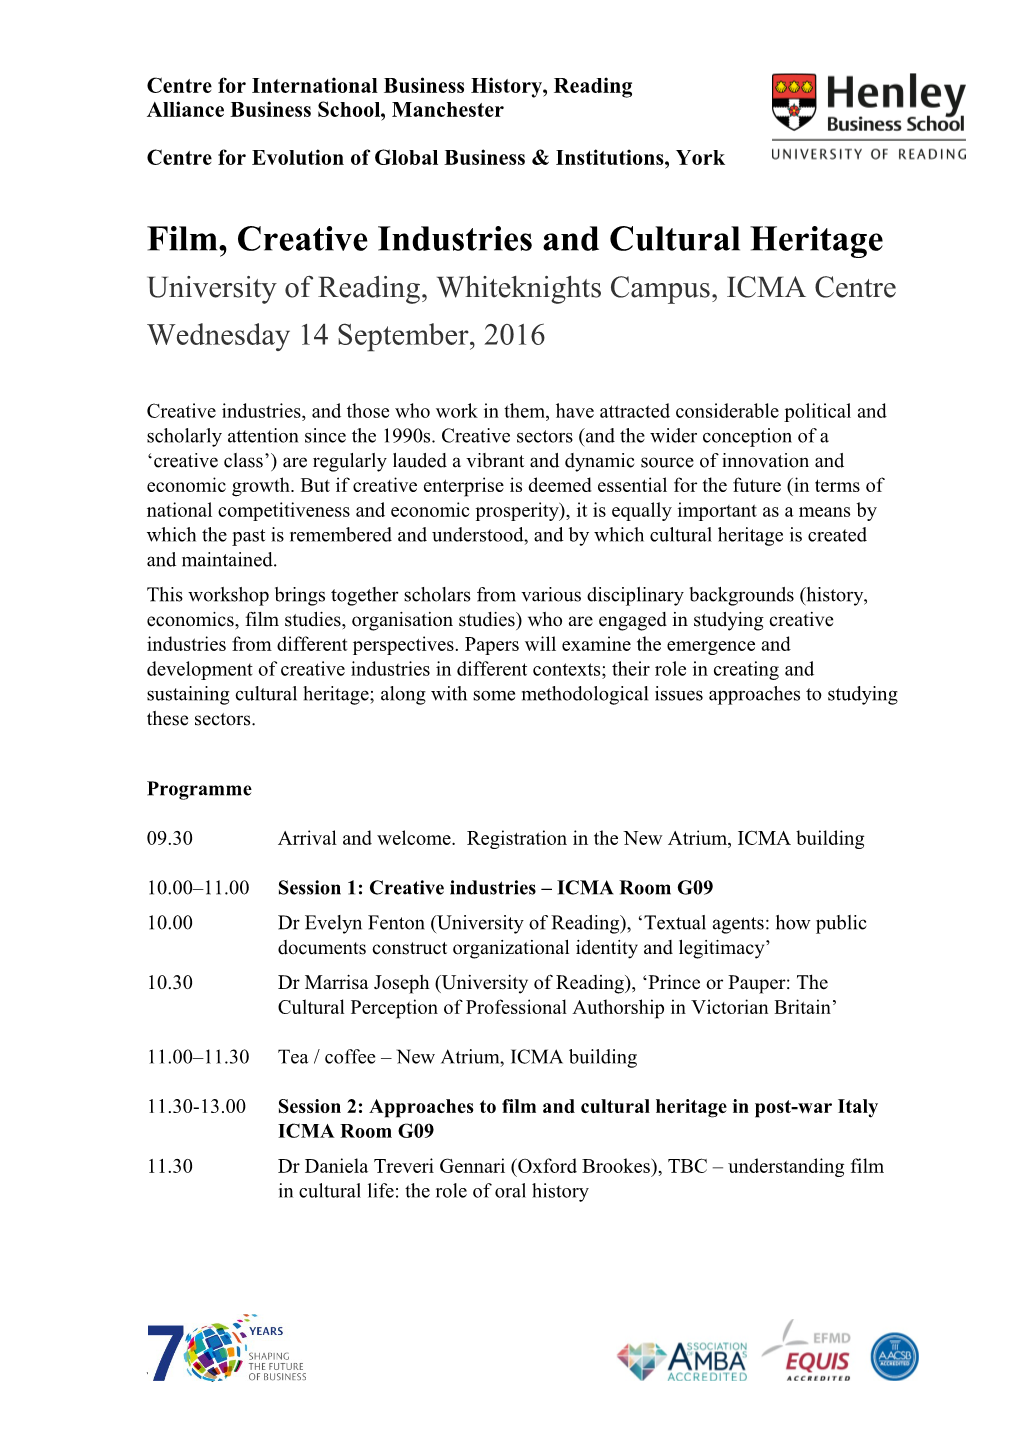 Film, Creative Industries and Cultural Heritage